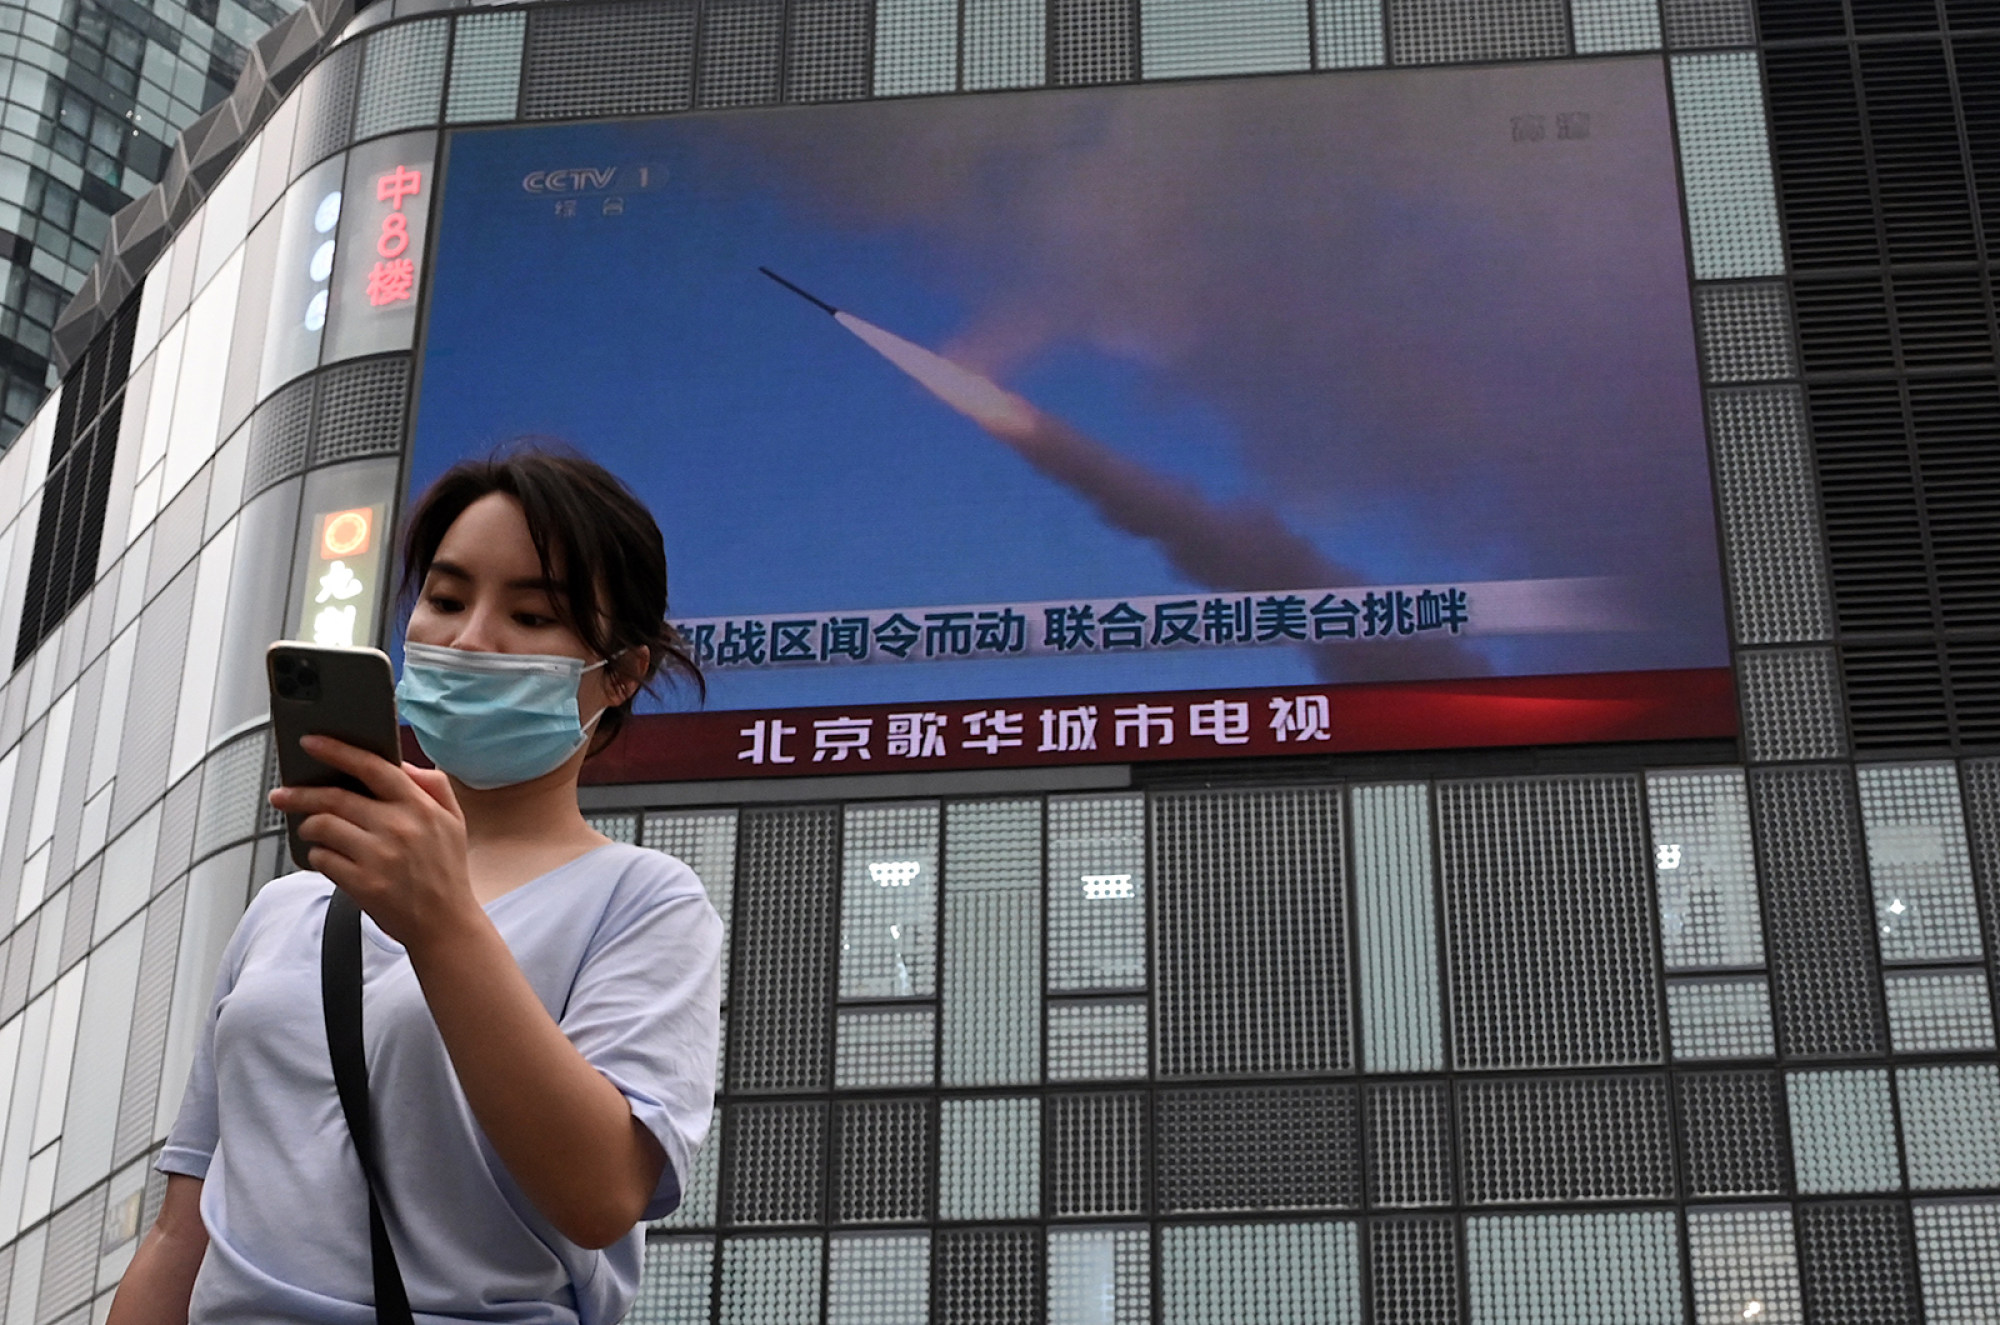 A woman in Beijing walks past a large screen showing a news broadcast about China’s military exercises encircling Taiwan in August. Photo: Getty Images/TNS via AFP